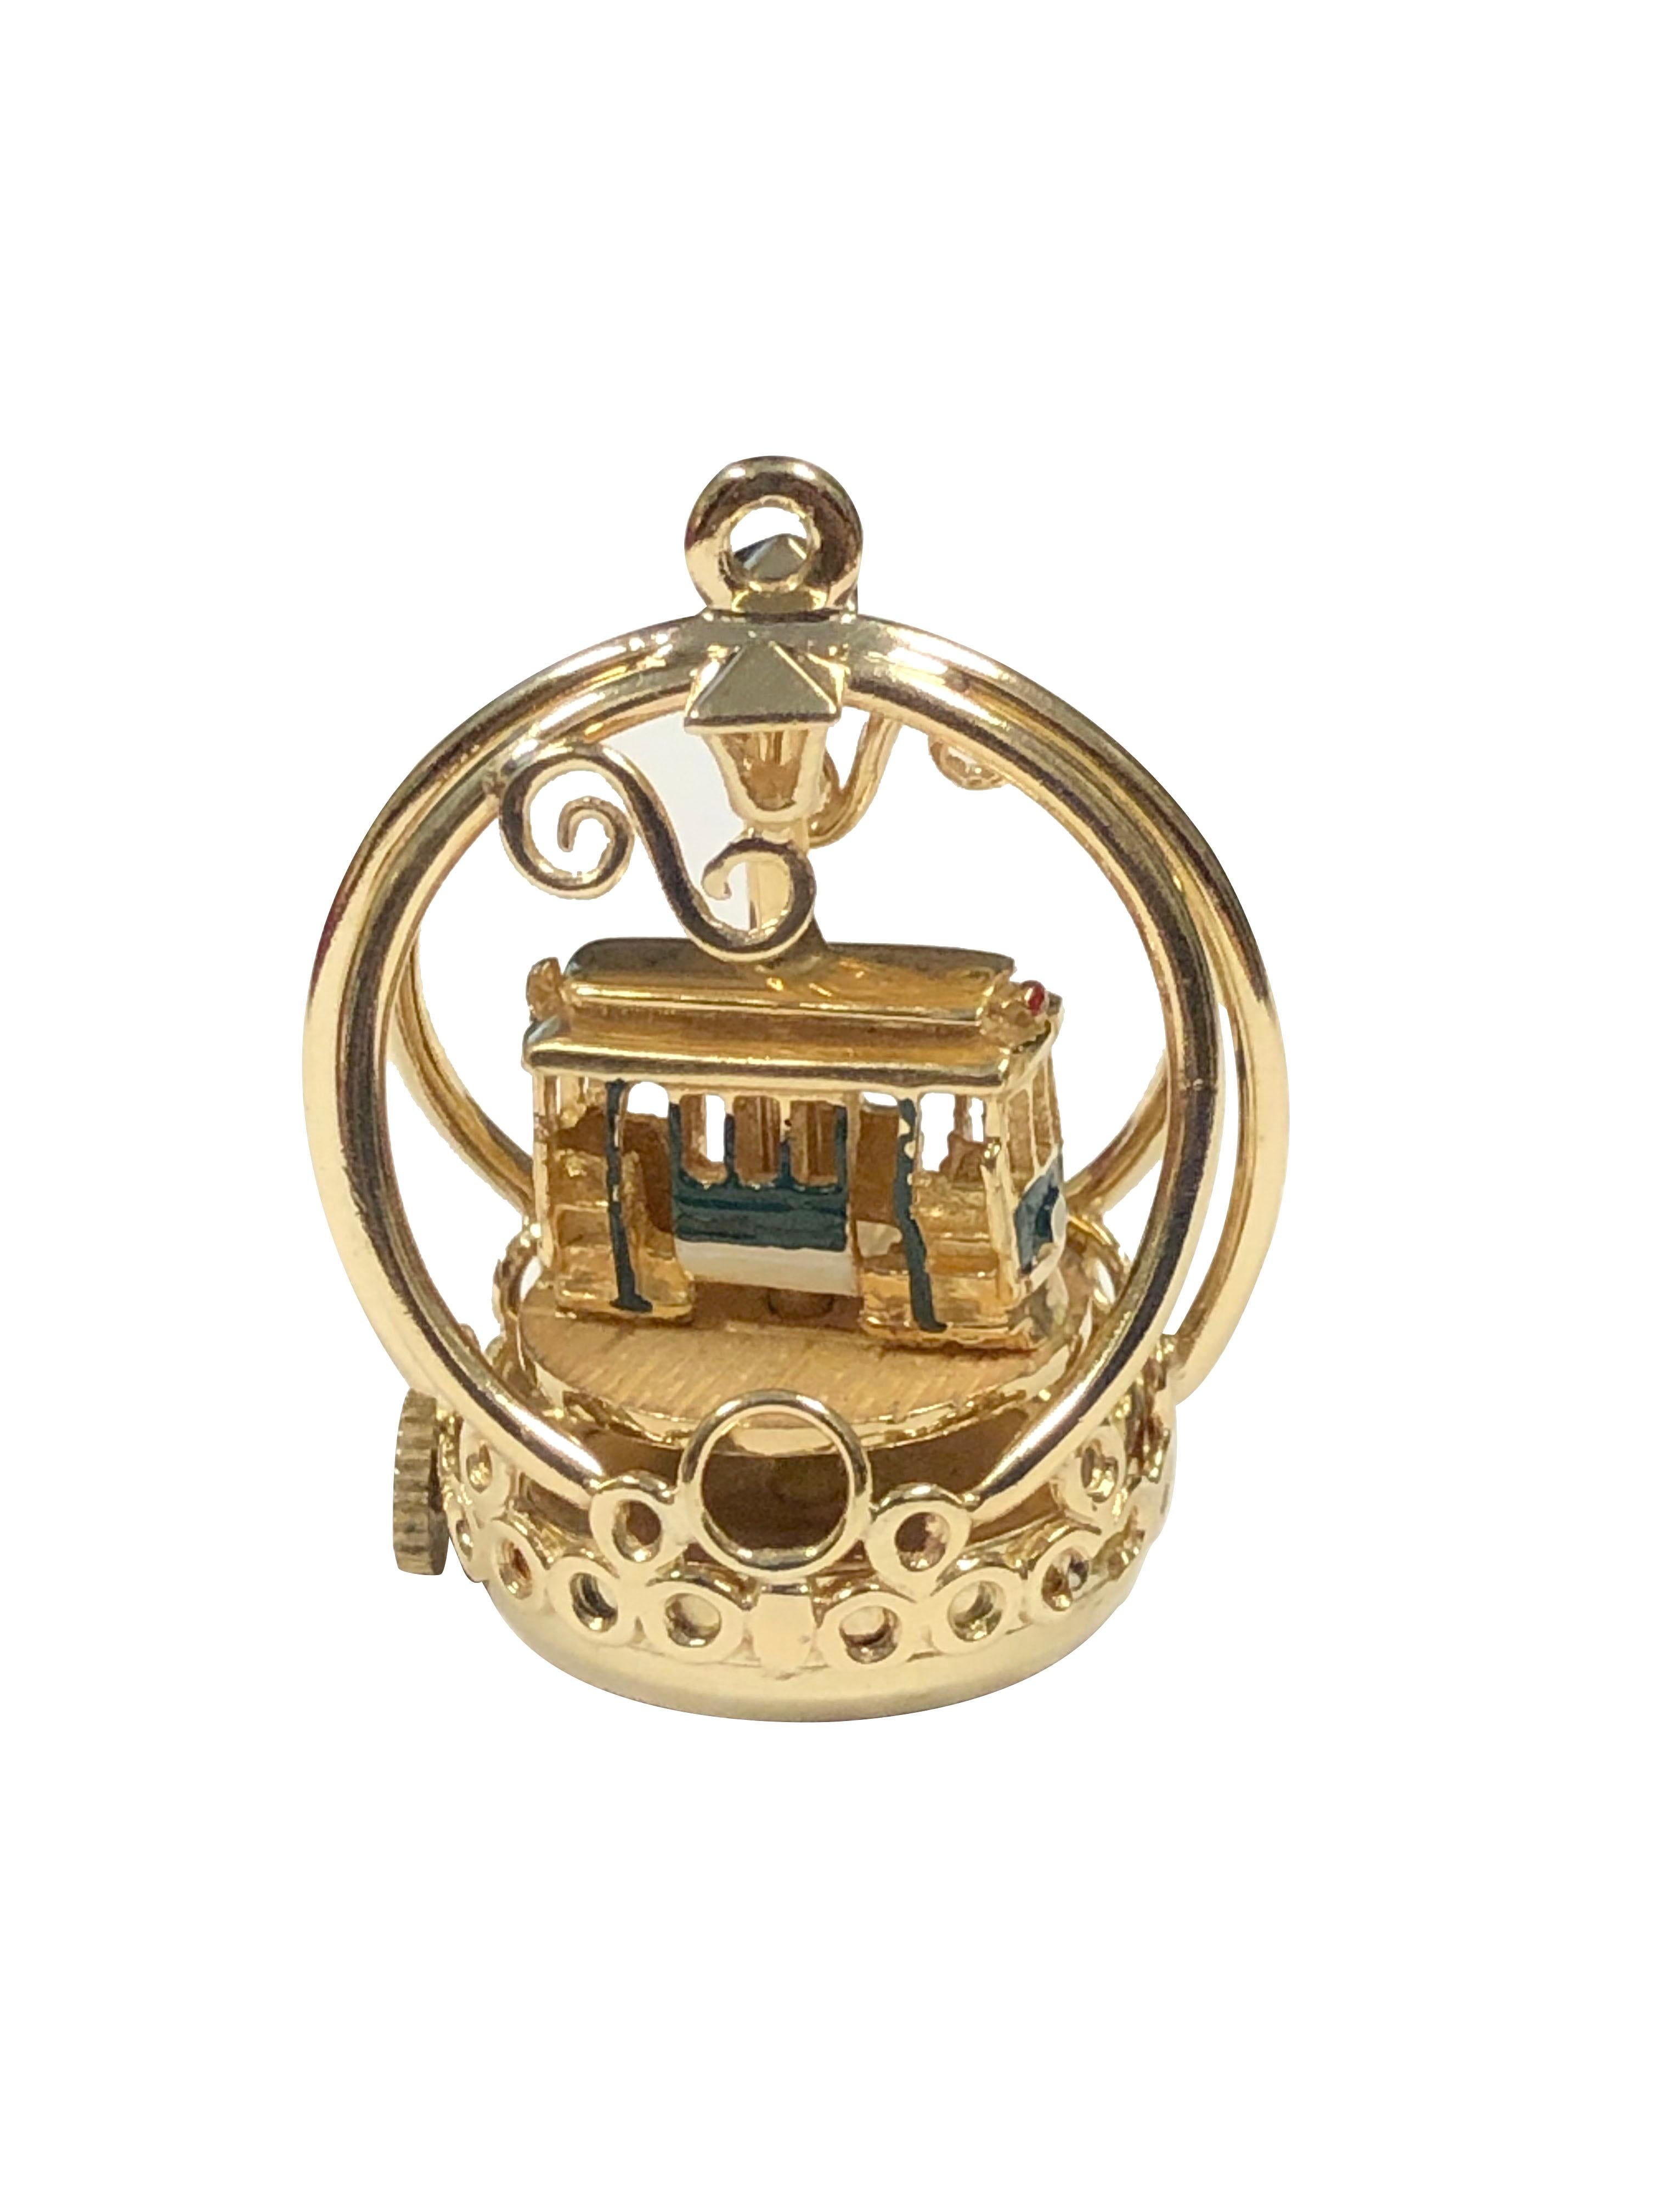 Circa 1960s Henry Dankner 14k Yellow Gold Whimsical Mechanical Street Car Charm, measuring 3/4 inch in diameter and 1 1/8 inch in height, weighing 16.3 Grams, very detailed with enamel, very detailed and recently having the mechanism serviced.  